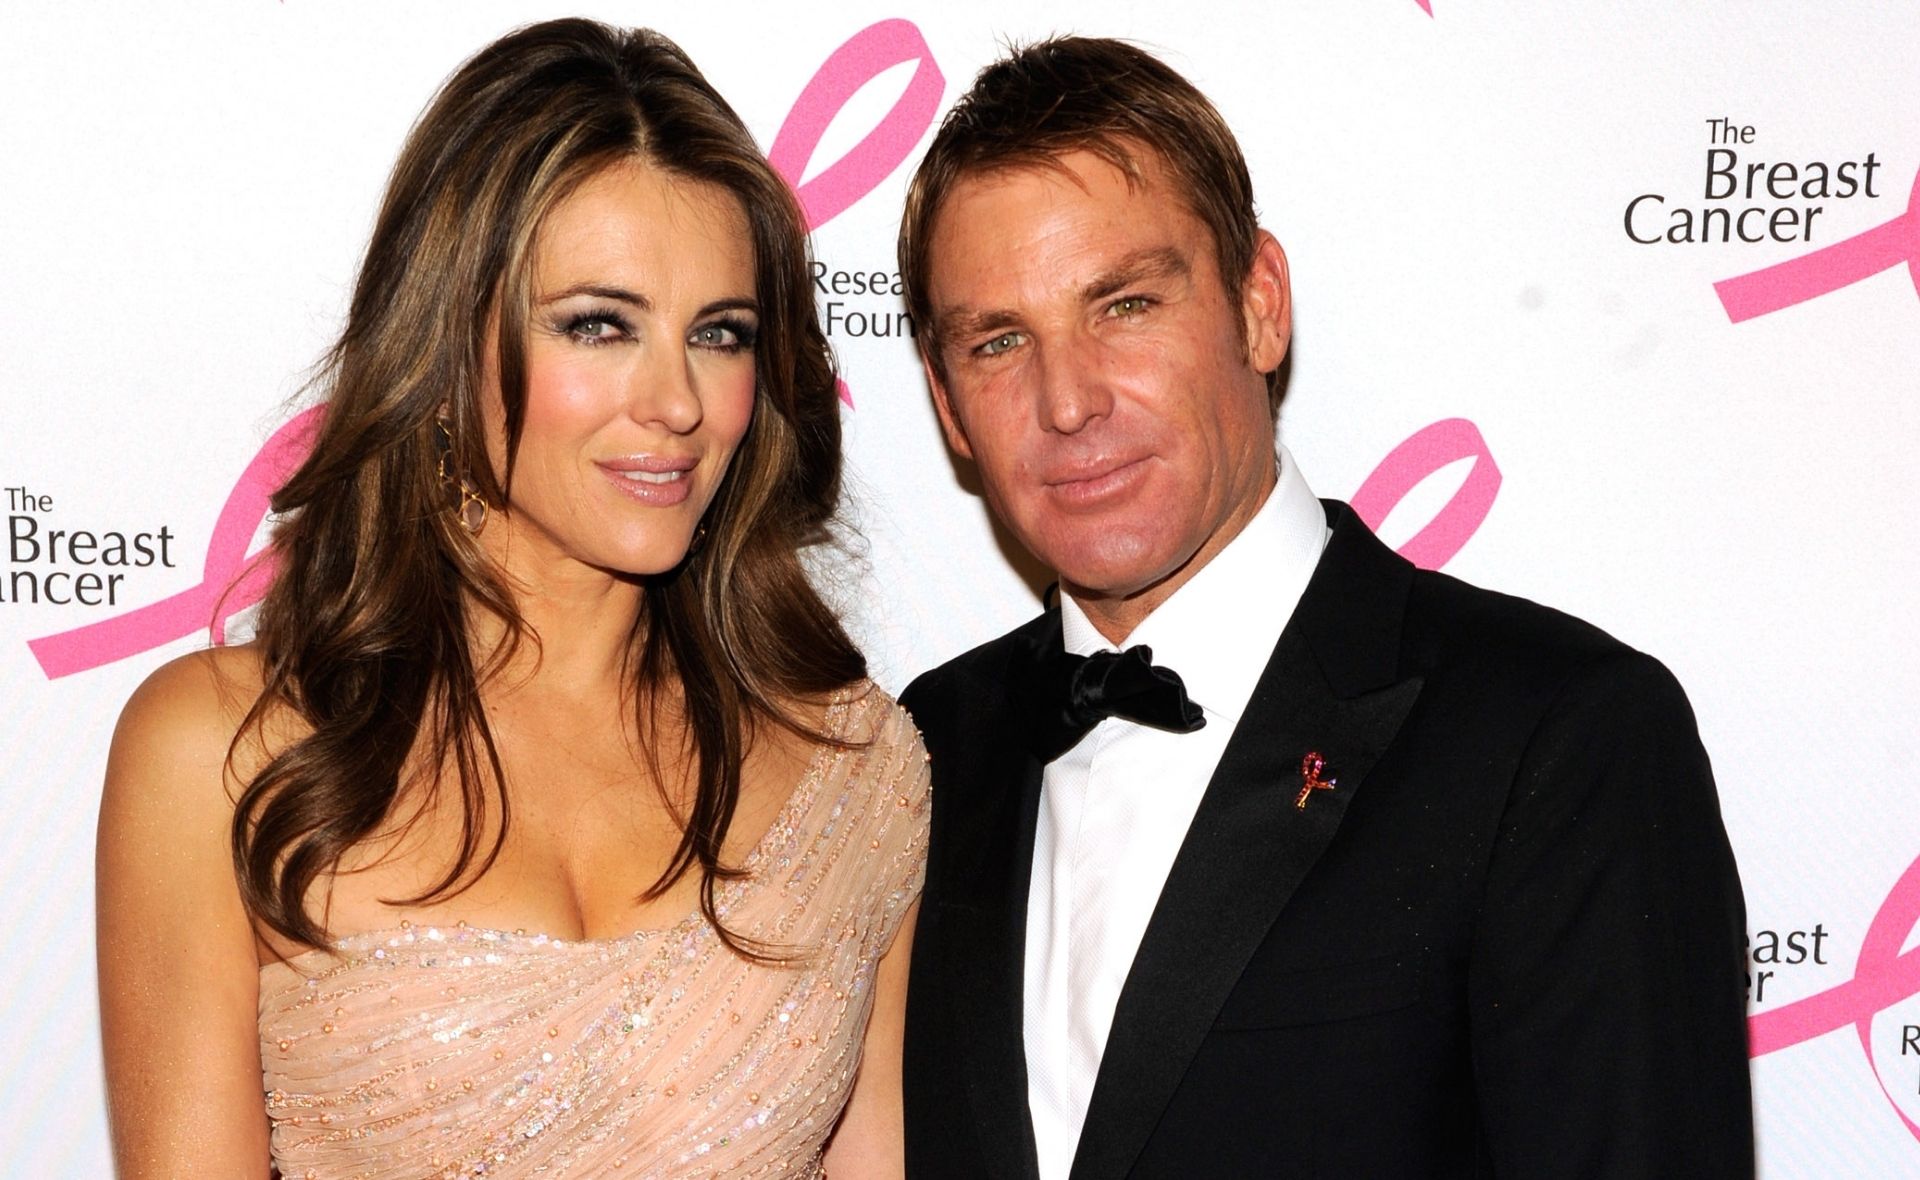 The actress and her “lionheart”: Looking back on Shane Warne and Liz Hurley’s three-year romance before his tragic death